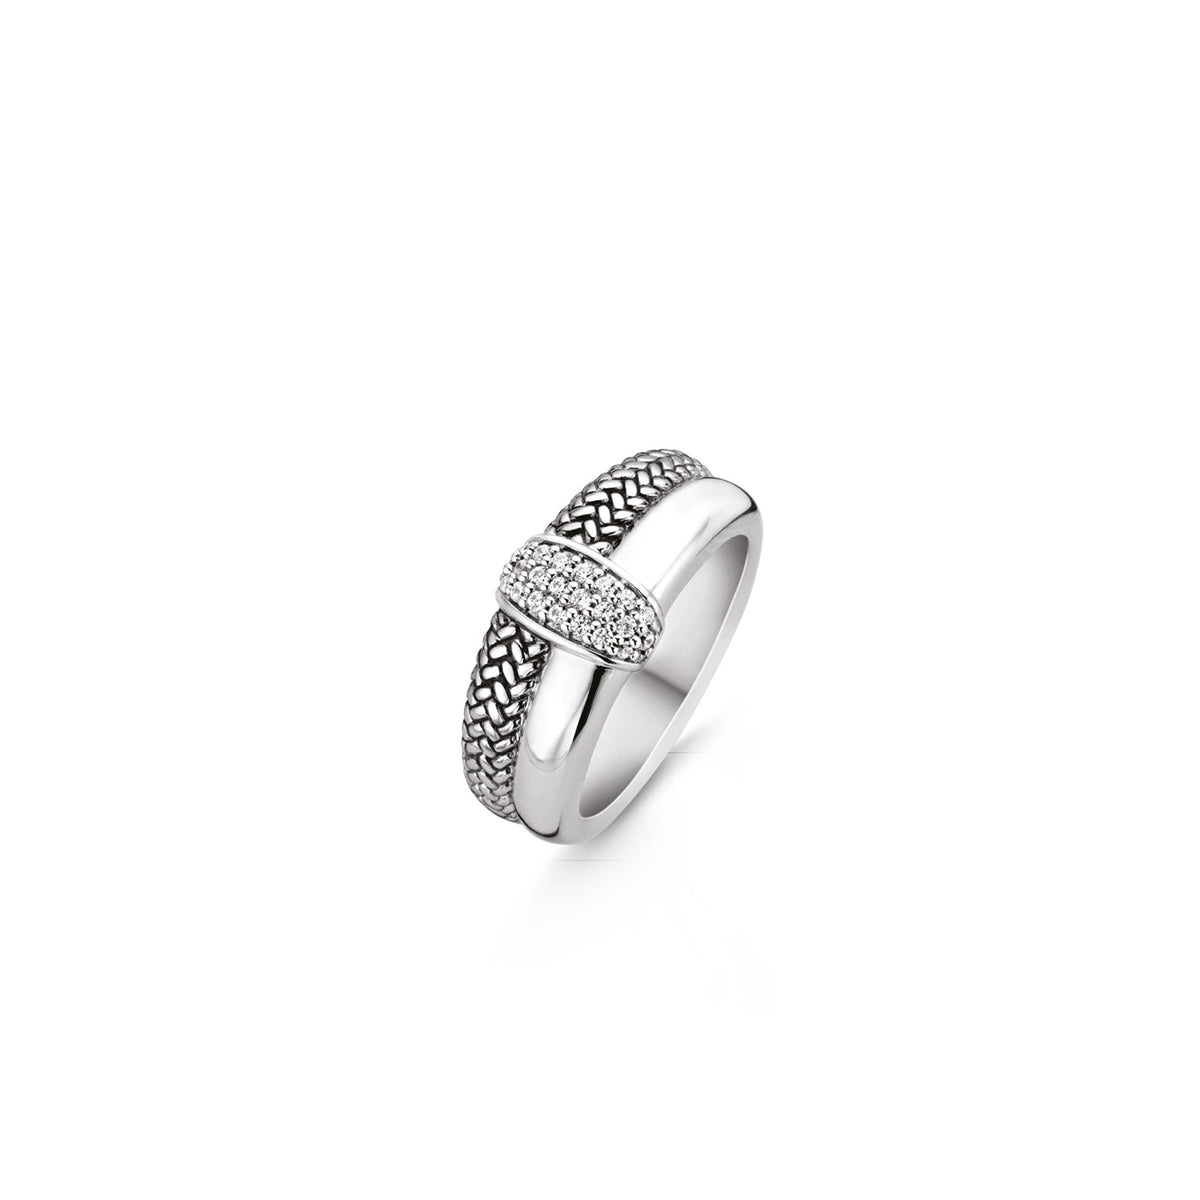 TI SENTO Sterling Silver Weave Band with Cubic Zirconia Center